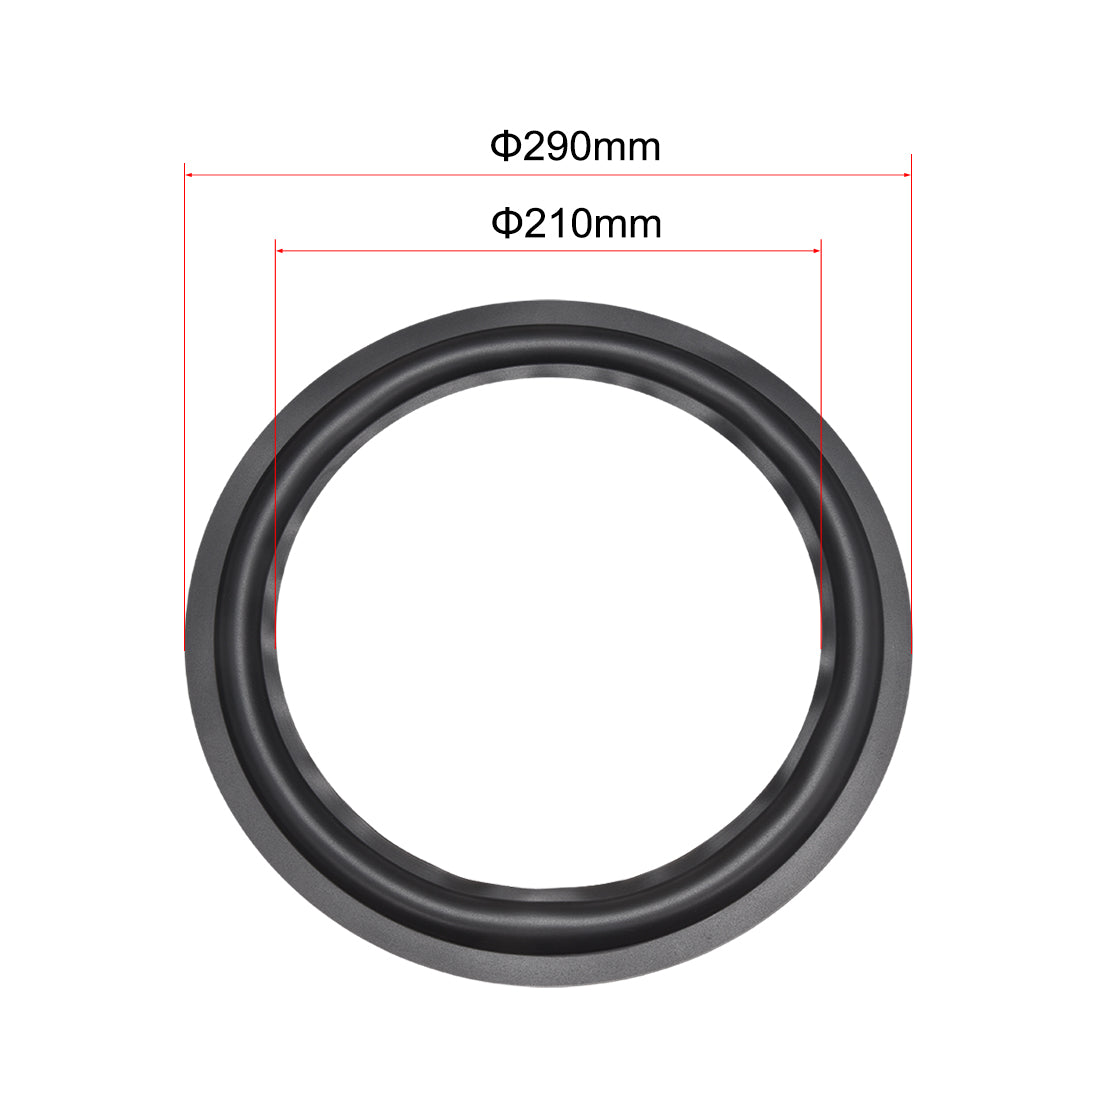 uxcell Uxcell 12" 12inch Speaker Rubber Edge Surround Rings Replacement Part for Speaker Repair or DIY 2pcs